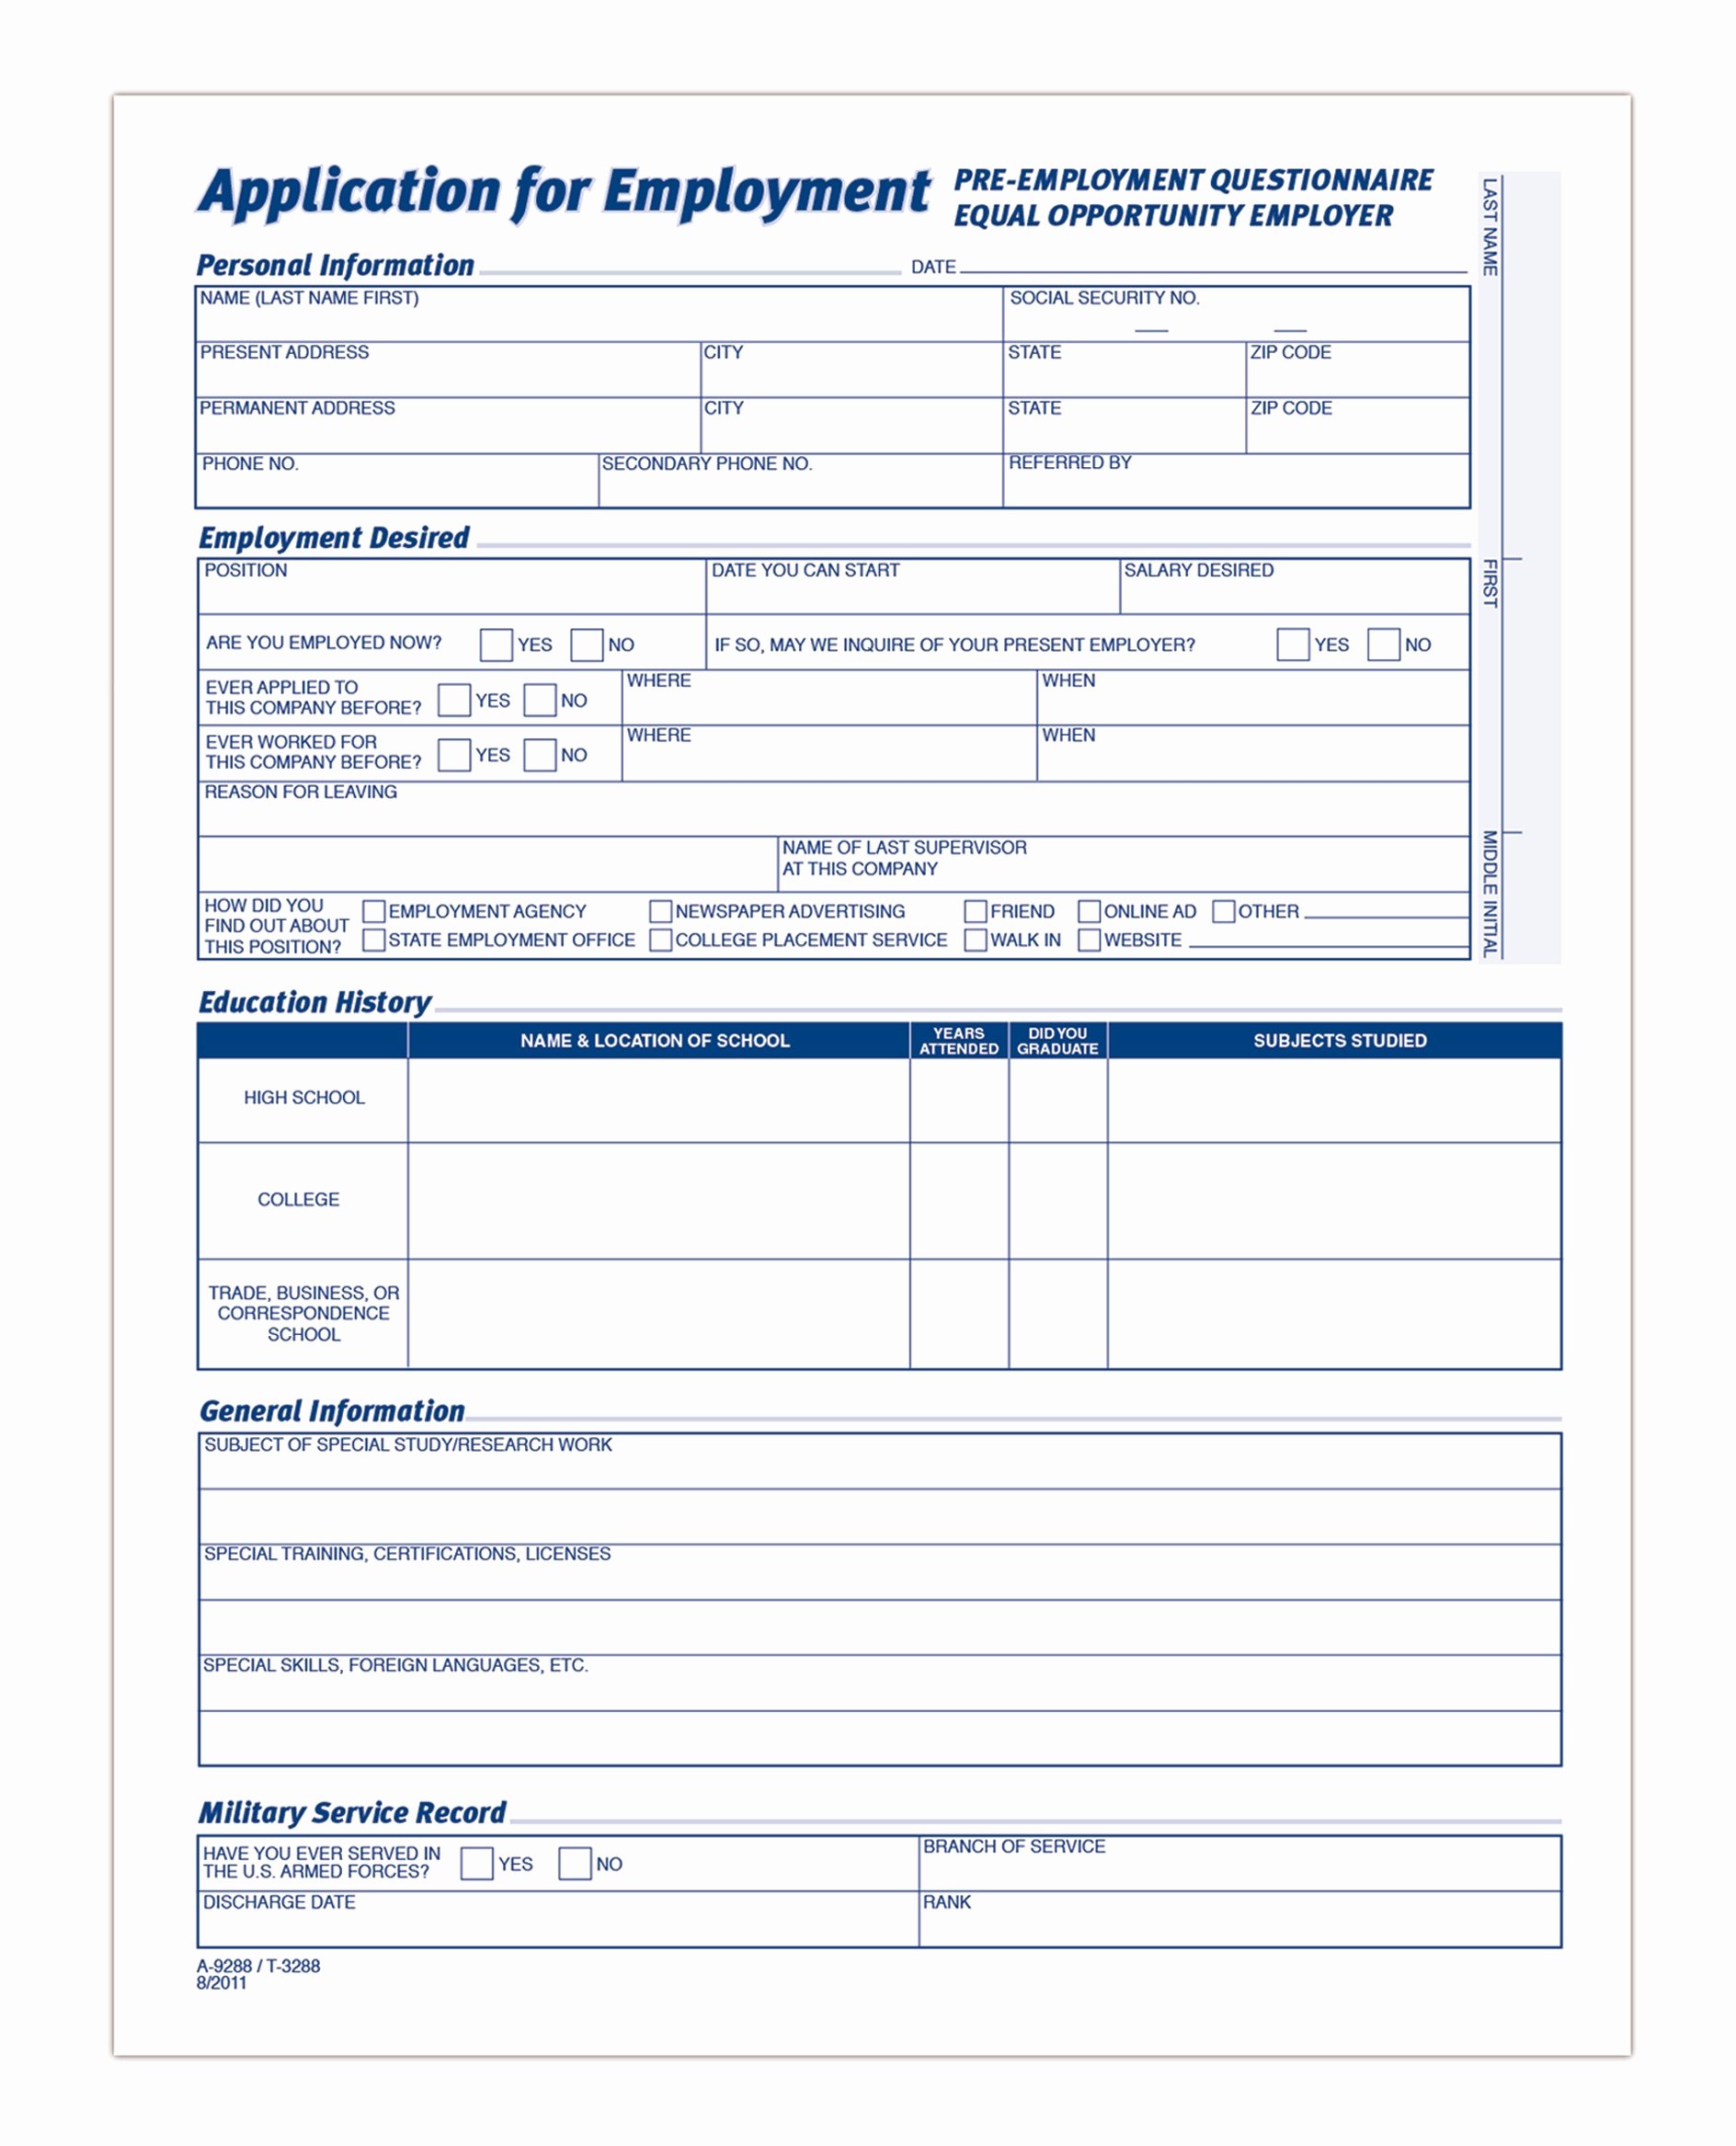 Application for Employment Free Template Elegant Application for Employment 4 Page form 25 Pk